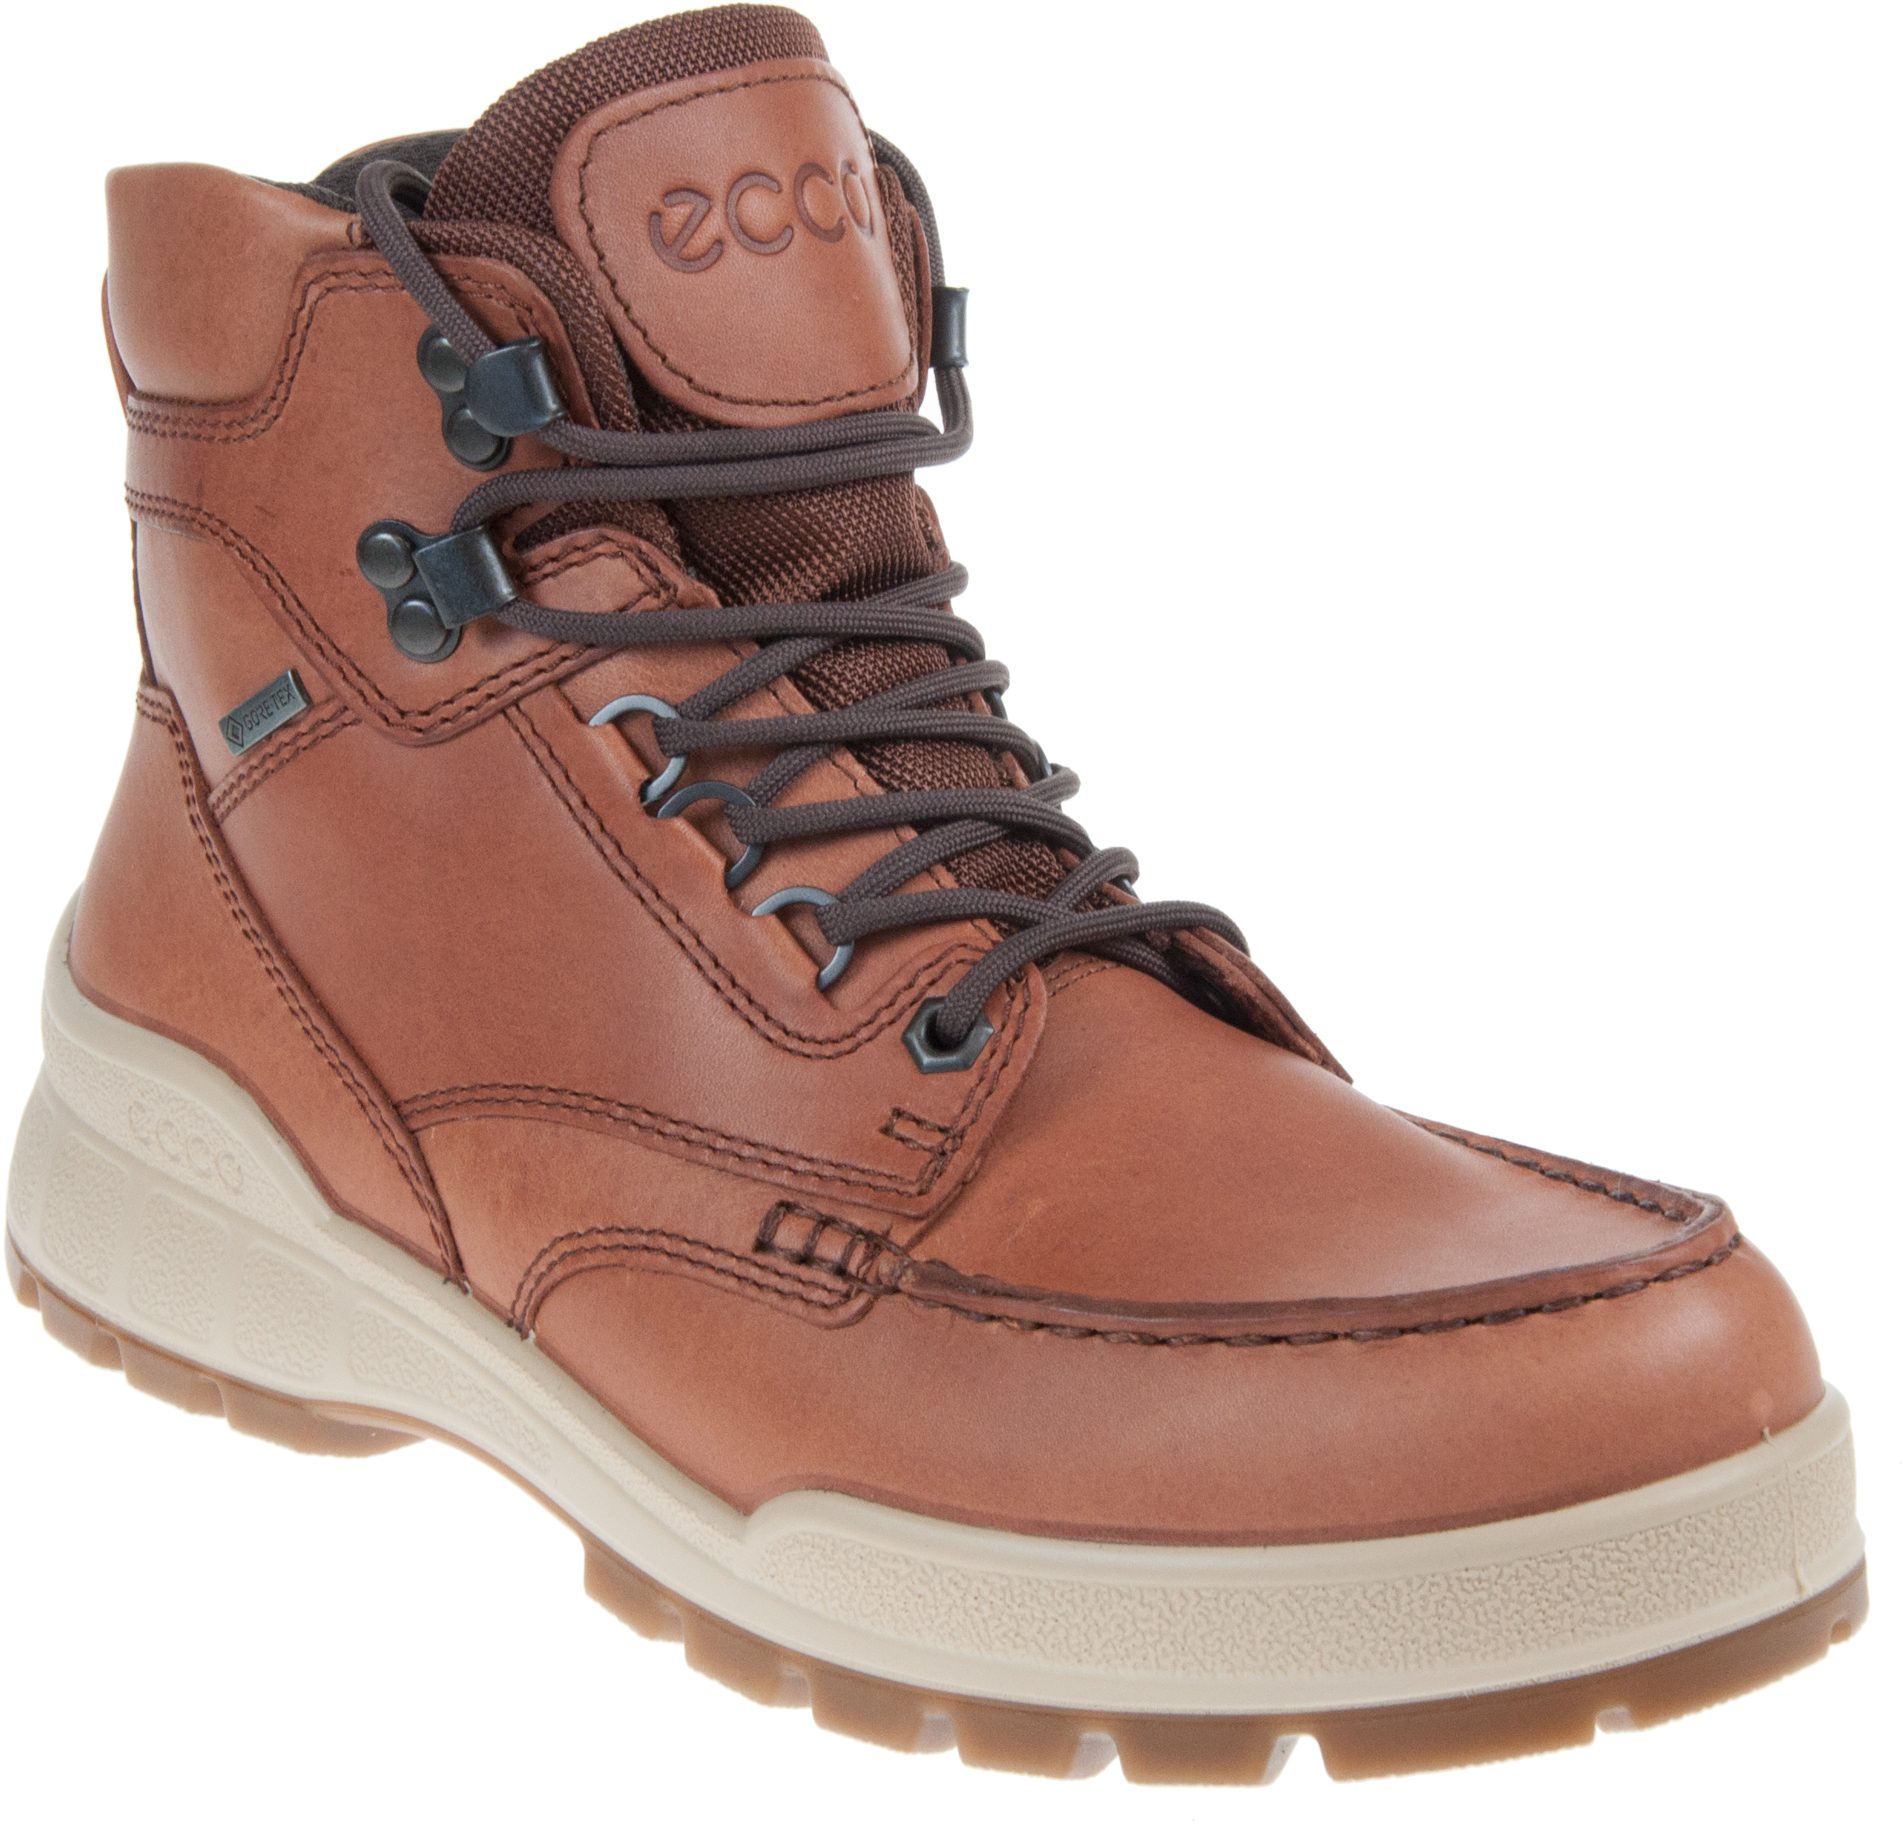 Ecco Track 25 Gore-Tex Hi Womens 831703 01060 - Ankle Boots Shoes